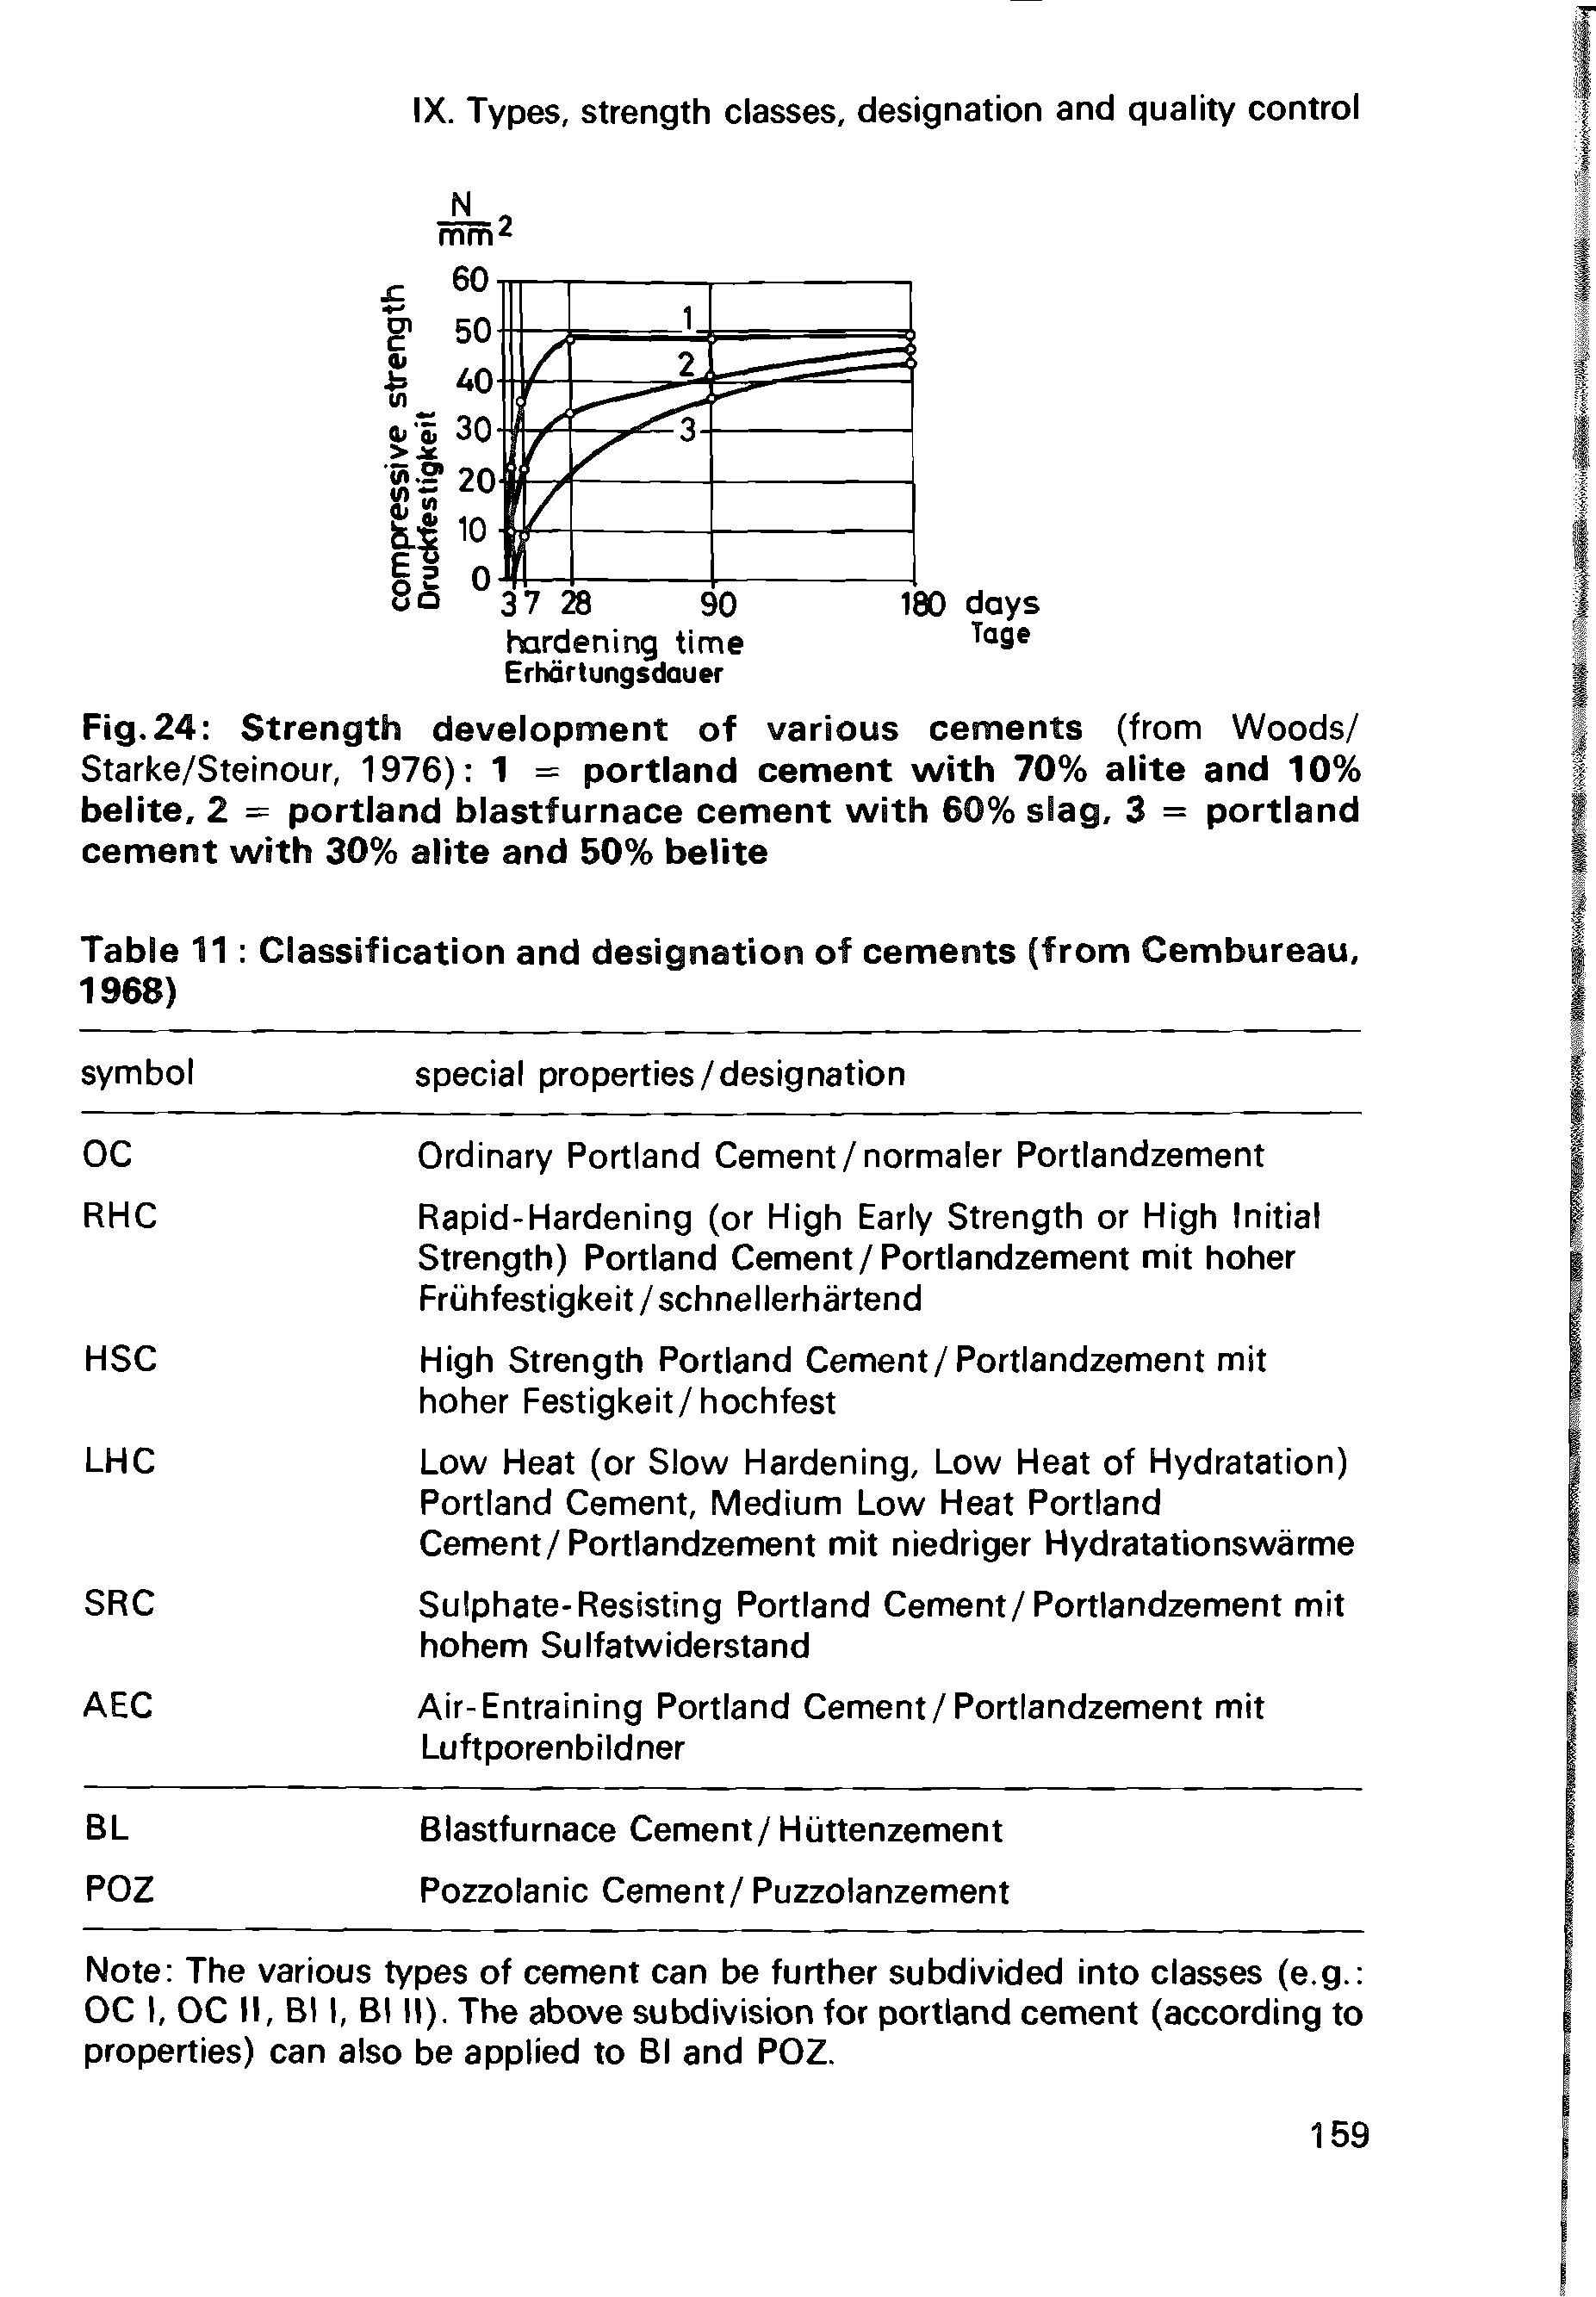 Fig. 24 Strength development of various cements (from Woods/ Starke/Steinour, 1976) 1 = Portland cement with 70% alite and 10% belite, 2 = Portland blastfurnace cement with 60% slag, 3 = Portland cement with 30% alite and 50% belite...